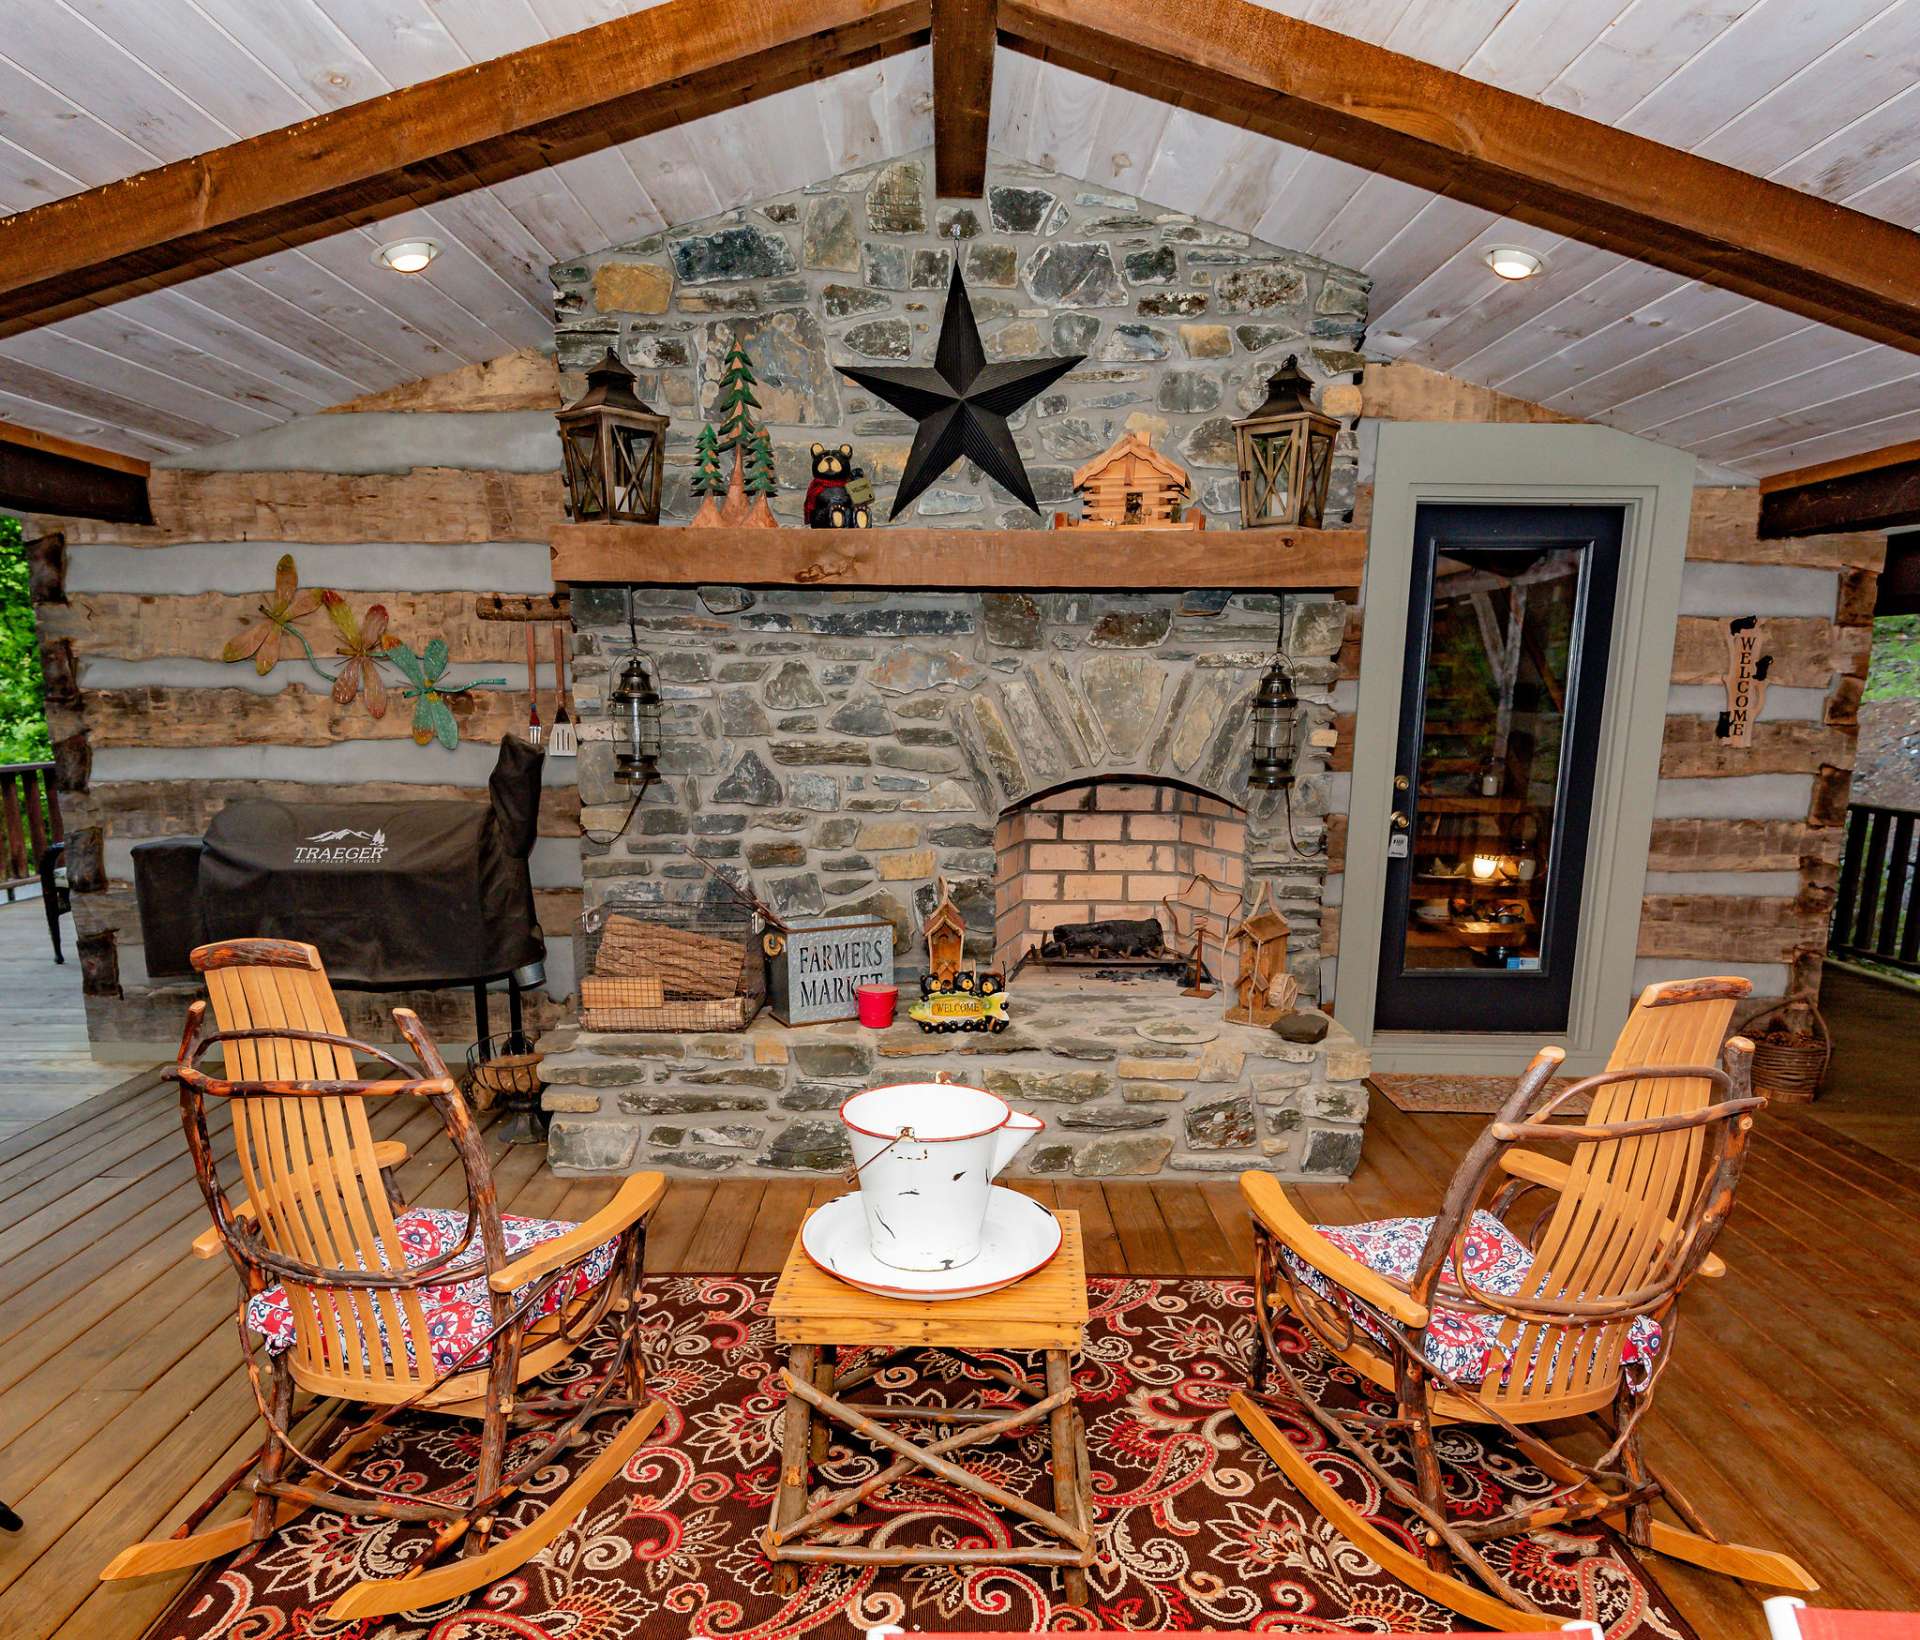 The covered porch with outdoor fireplace is ideal for making family memories enjoying outdoor barbecues, eating s'mores and telling ghost stories.